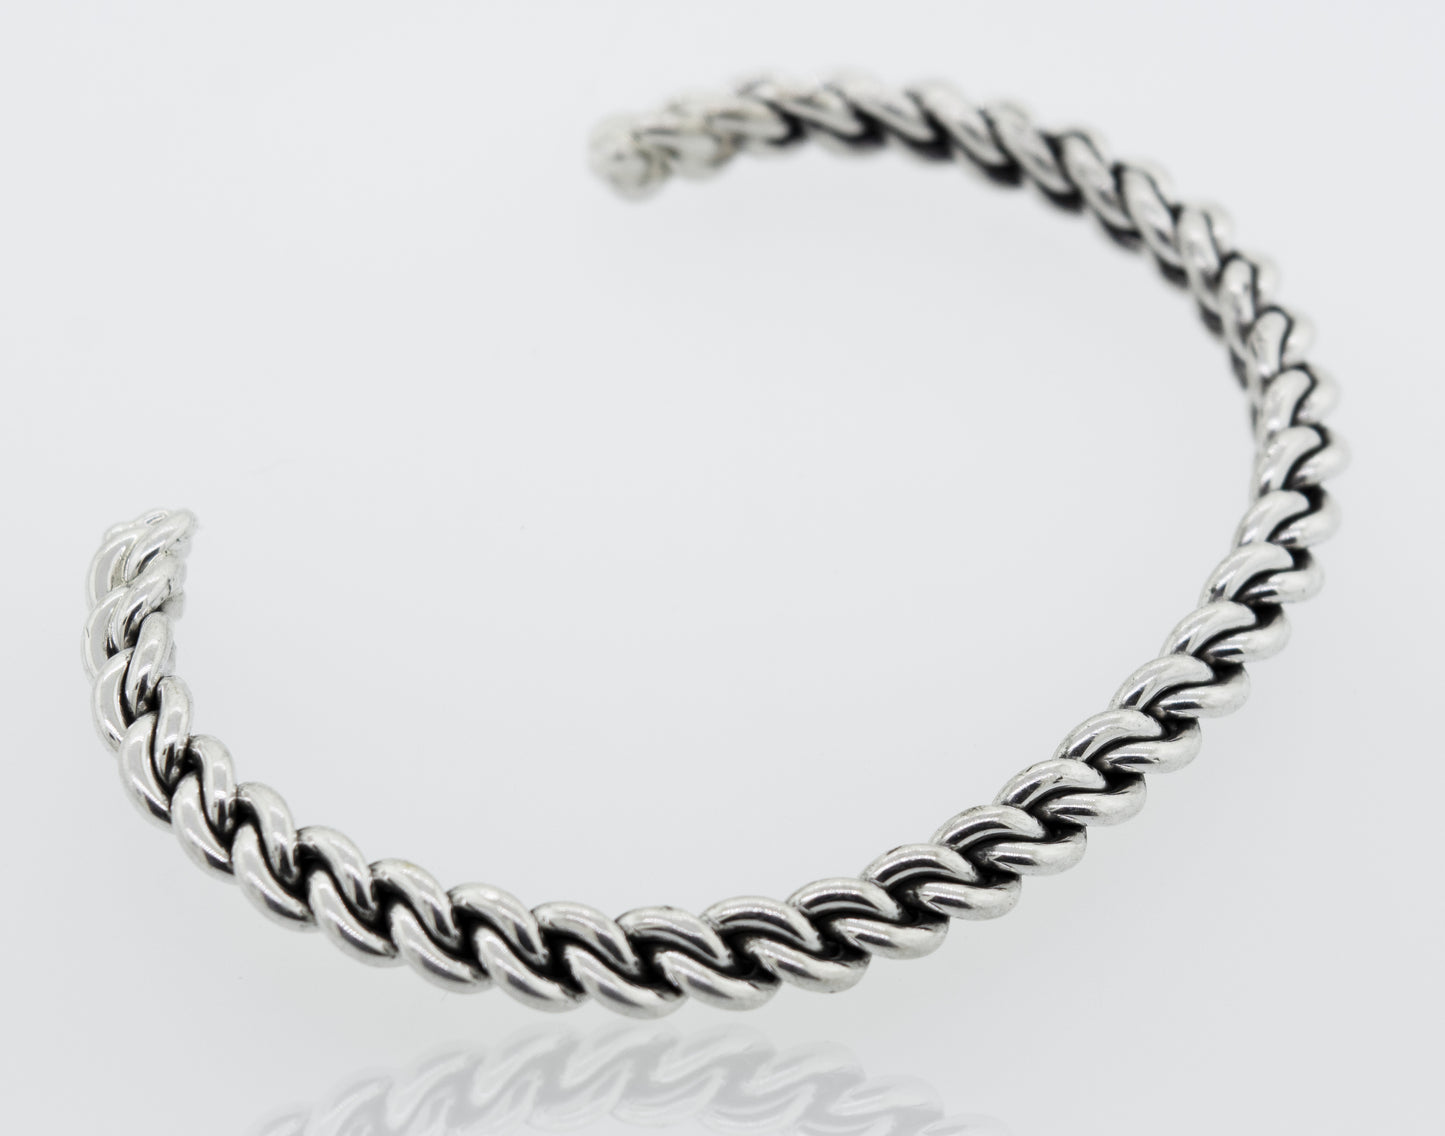 An elegant Native American Handmade Silver Woven Link Bracelet by Super Silver on a white surface.